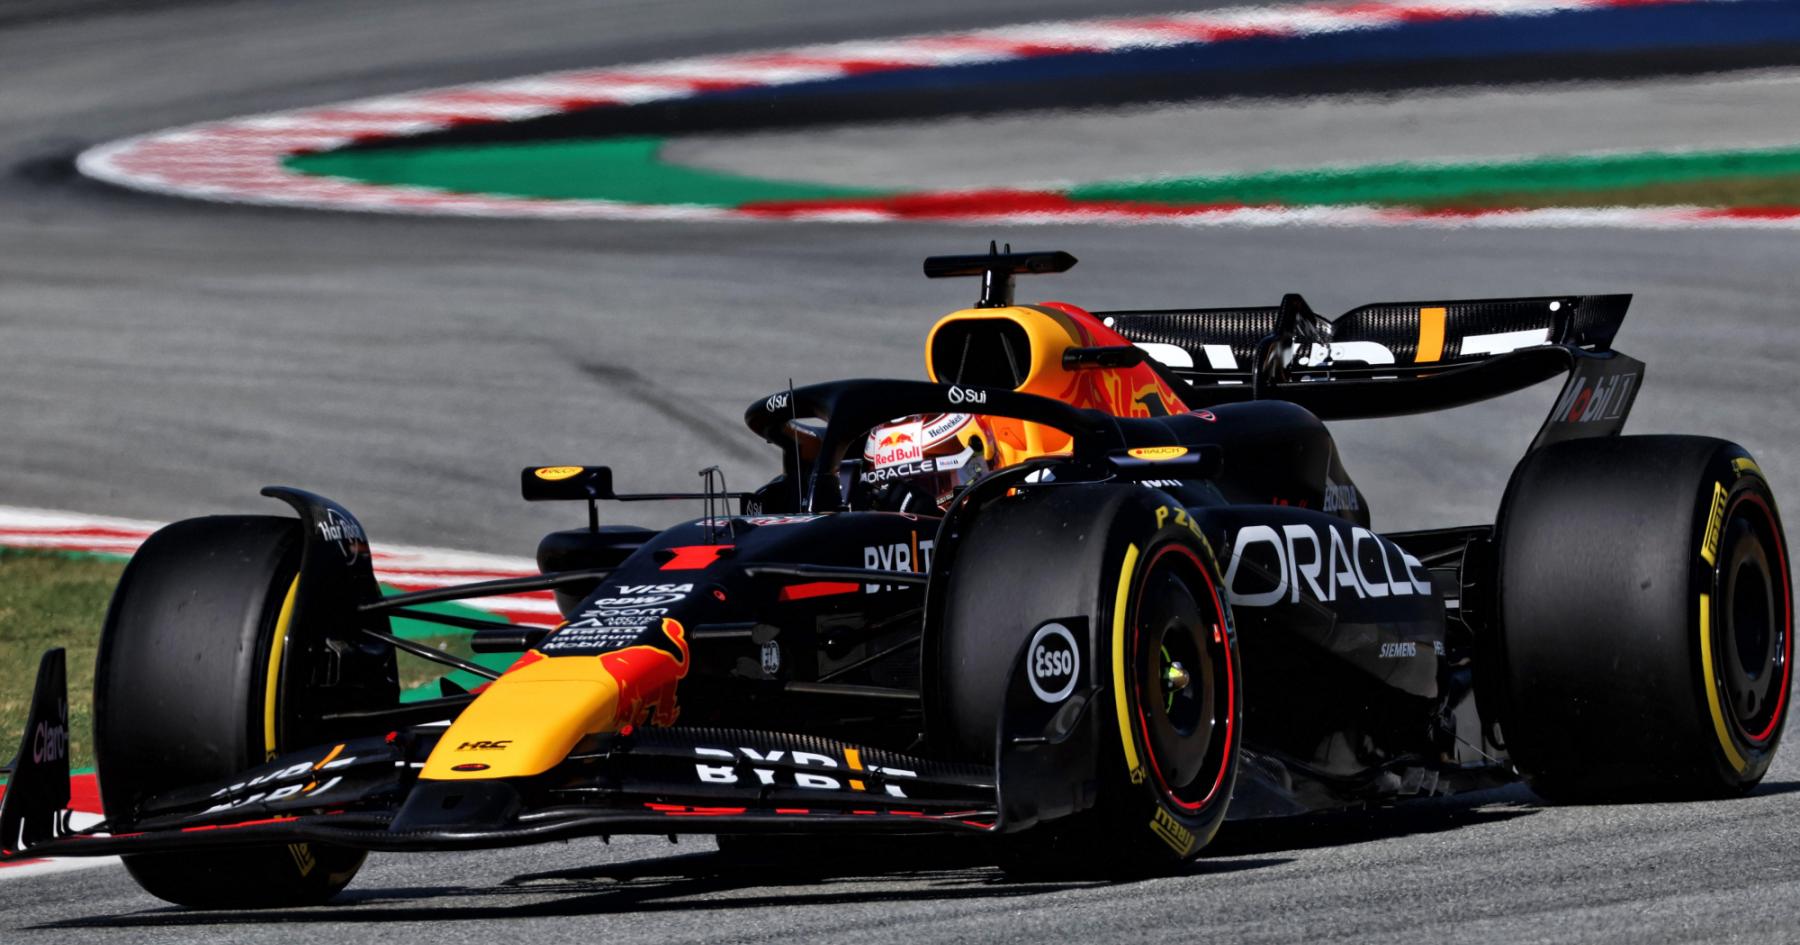 Verstappen Steals the Spotlight as Red Bull Faces Turbulence: Perez's Derailed Performance